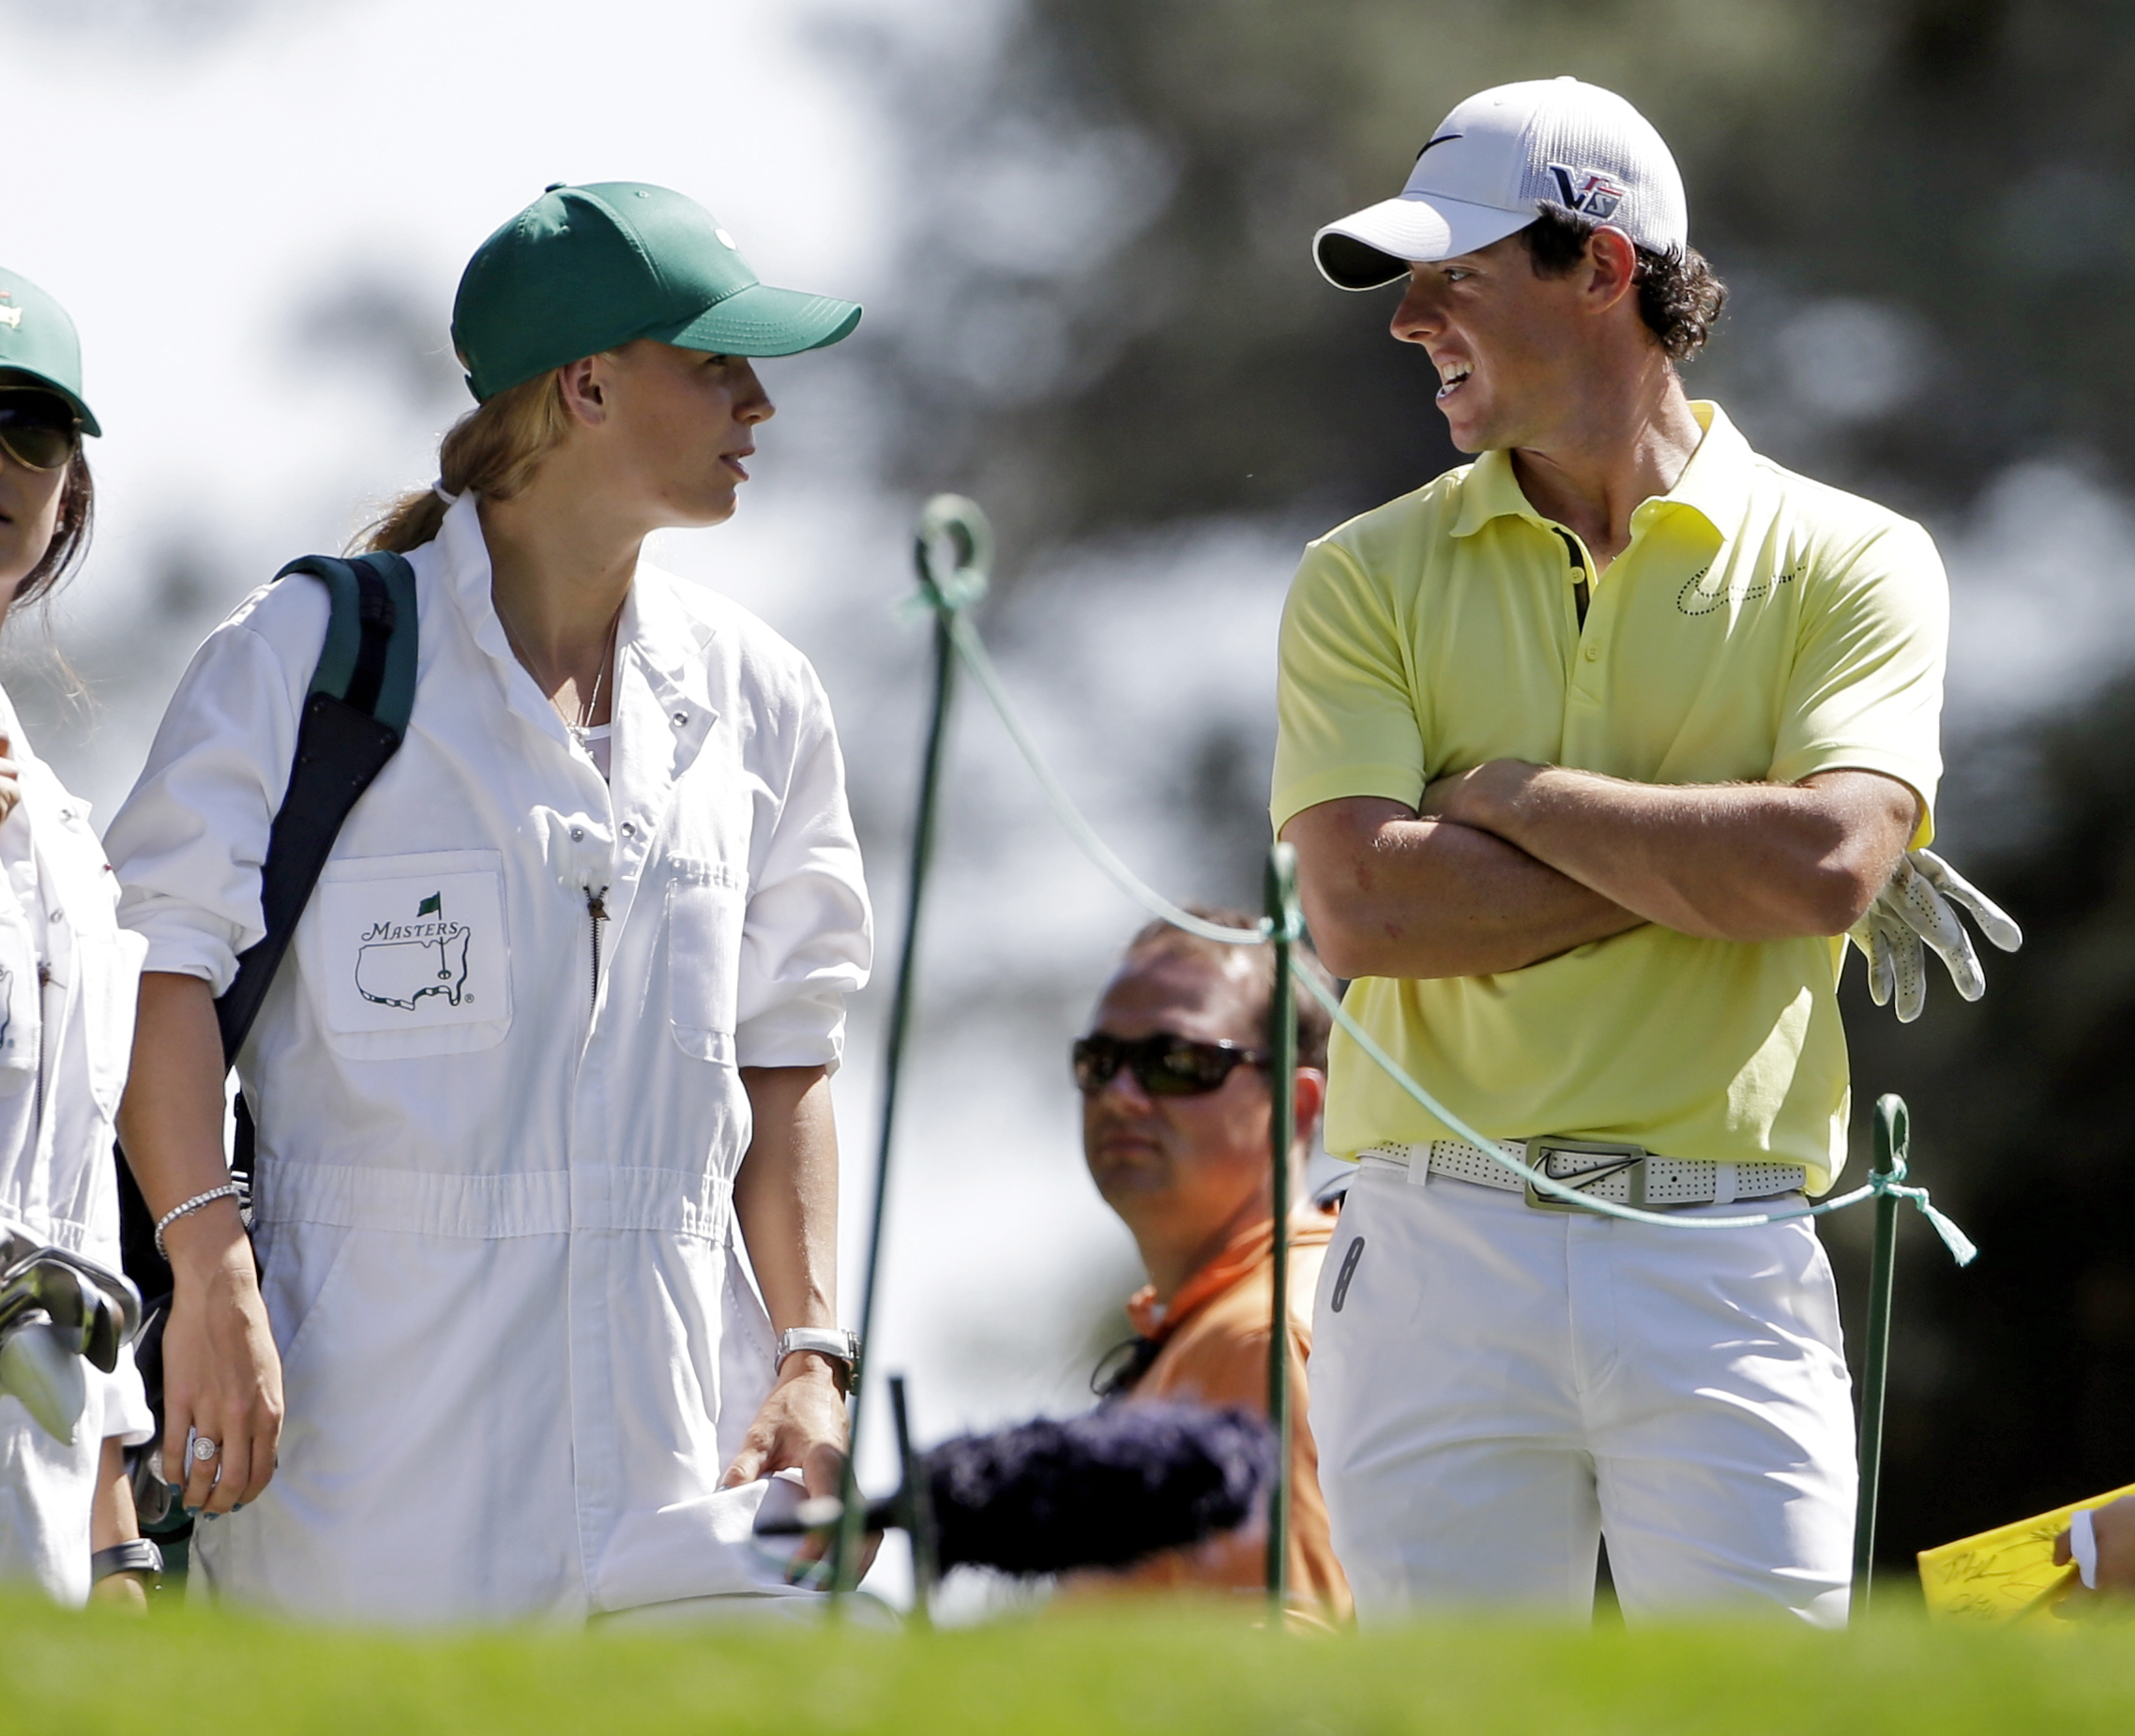 Rory McIlroy, of Northern Ireland, speaks with tennis player Caroline Wozniacki who caddied for him during the par three competition before the Masters golf tournament in Augusta, Ga. on April 10, 2013. (Darron Cummings—AP)